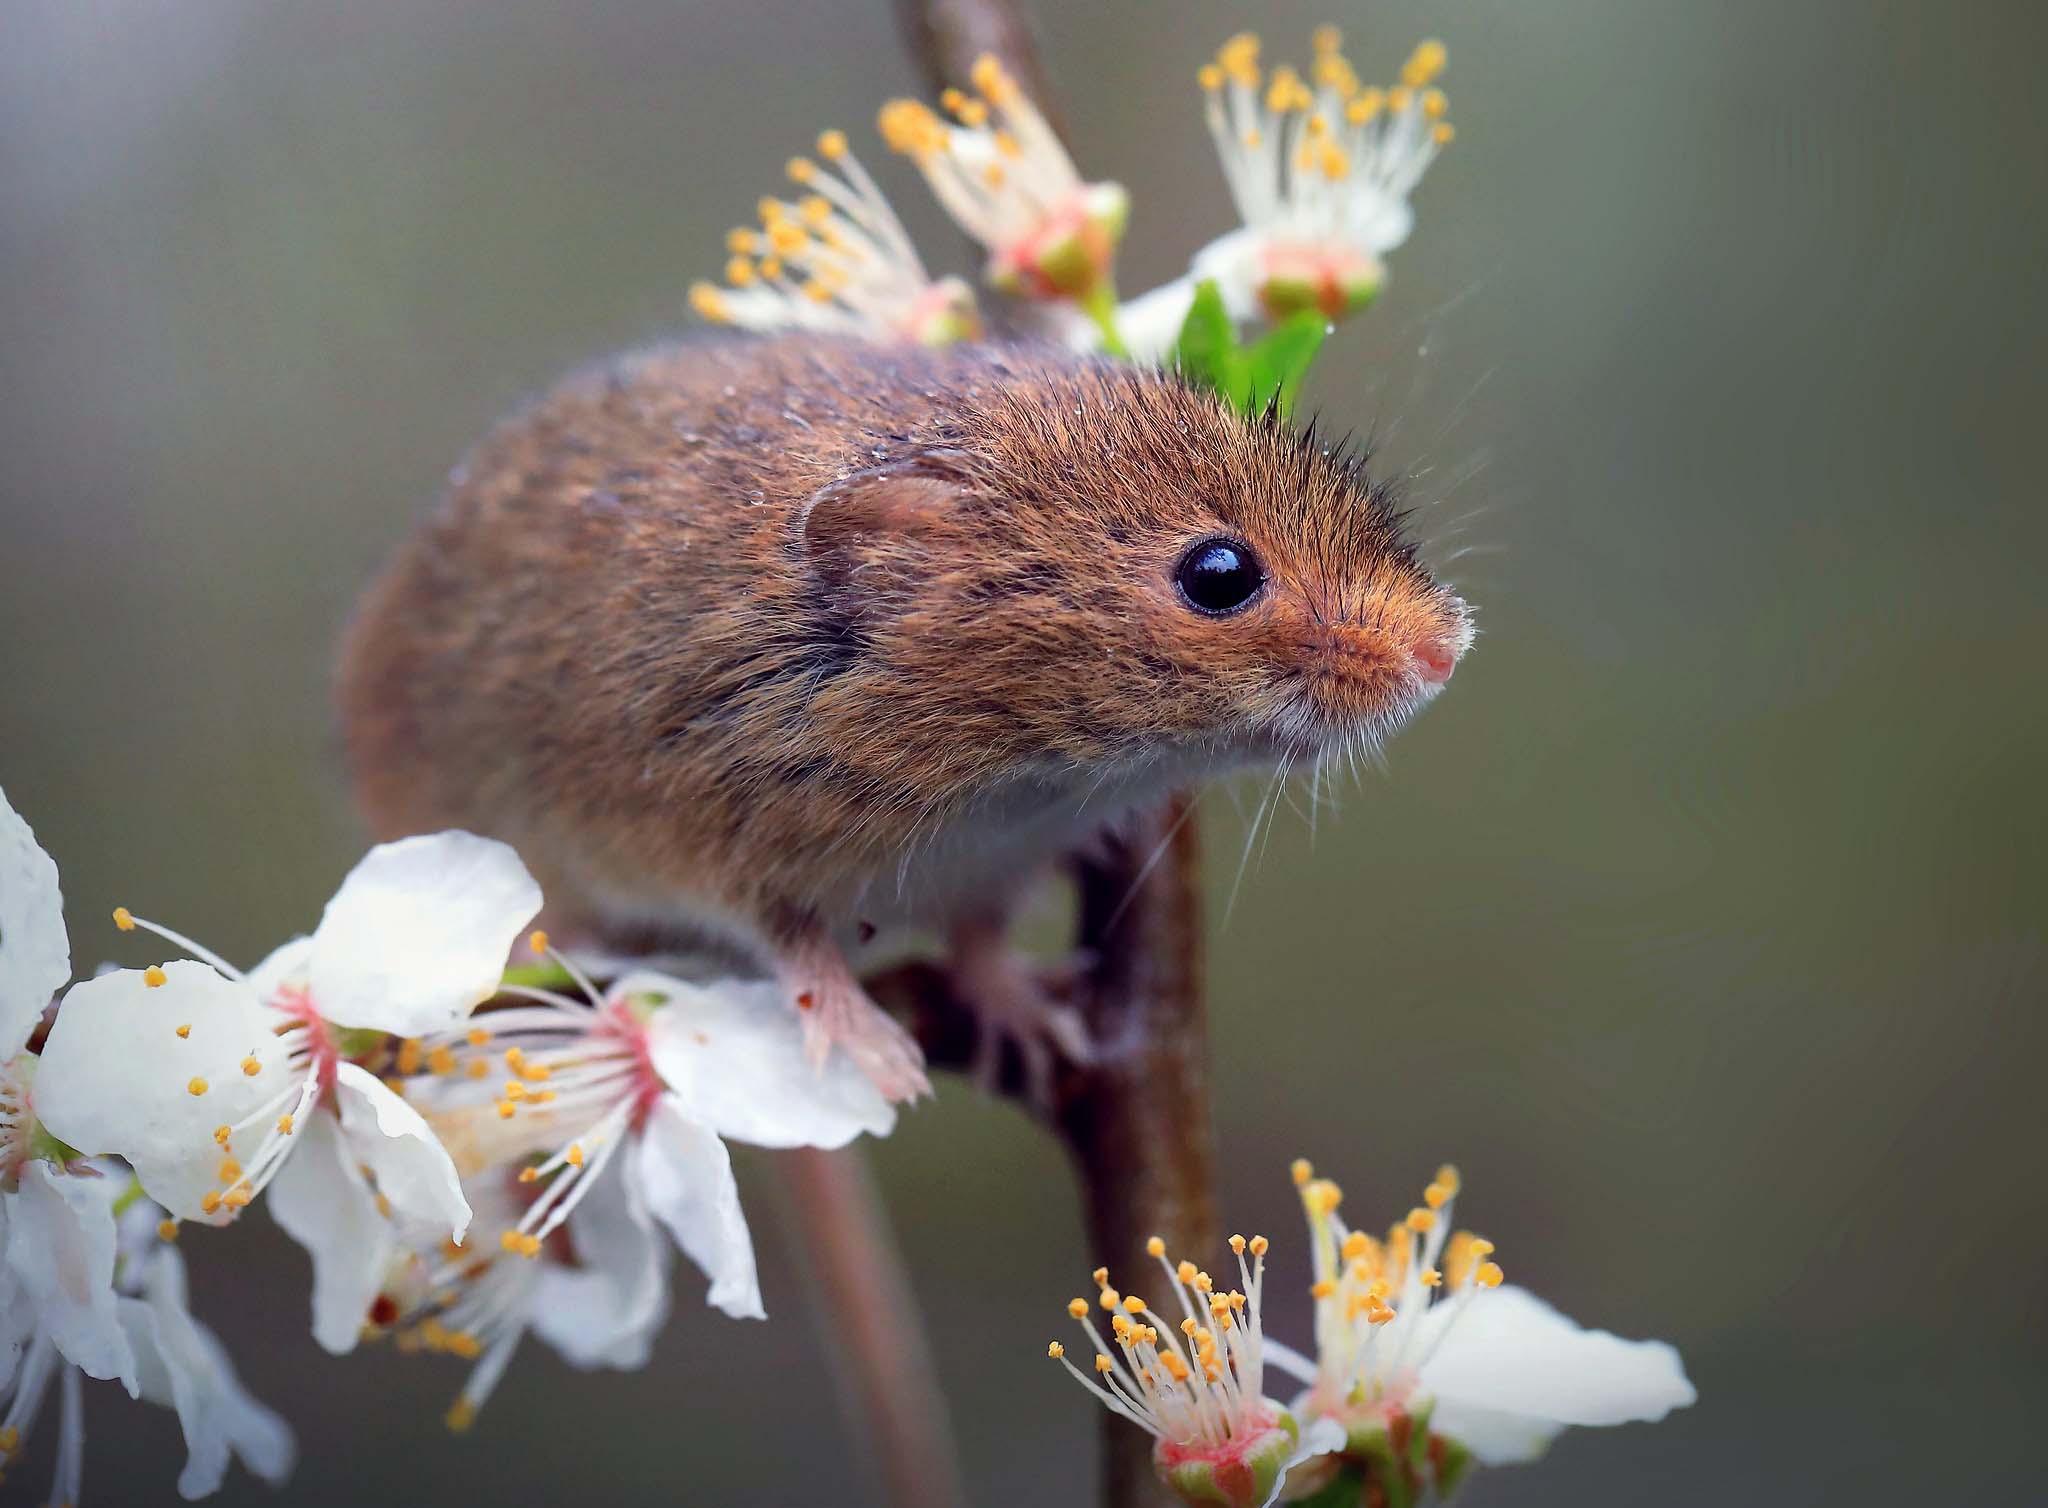 Close-up of a mouse perched on a branch covered in white flowers